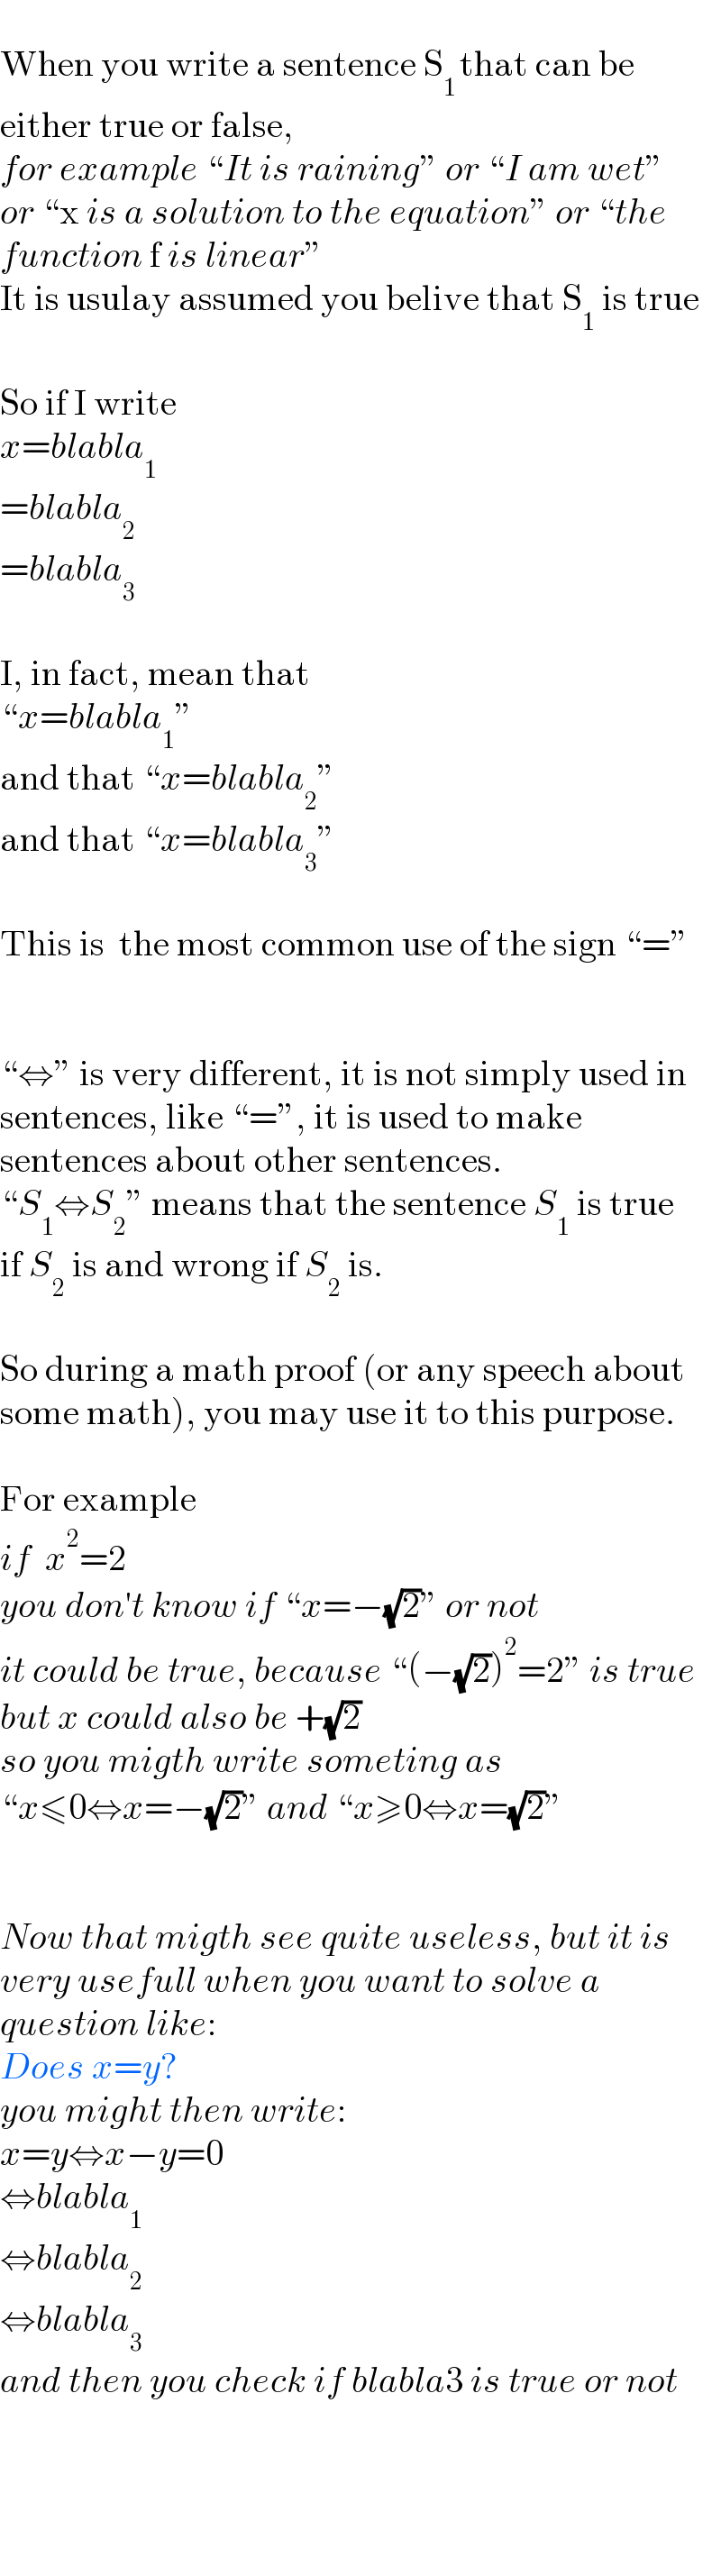   When you write a sentence S_(1 ) that can be  either true or false,   for example “It is raining” or “I am wet”  or “x is a solution to the equation” or “the  function f is linear”  It is usulay assumed you belive that S_1  is true    So if I write  x=blabla_1   =blabla_2   =blabla_3     I, in fact, mean that  “x=blabla_1 ”  and that “x=blabla_2 ”  and that “x=blabla_3 ”    This is  the most common use of the sign “=”      “⇔” is very different, it is not simply used in  sentences, like “=”, it is used to make  sentences about other sentences.  “S_1 ⇔S_2 ” means that the sentence S_1  is true  if S_2  is and wrong if S_2  is.    So during a math proof (or any speech about  some math), you may use it to this purpose.    For example  if  x^2 =2  you don′t know if “x=−(√2)” or not  it could be true, because “(−(√2))^2 =2” is true  but x could also be +(√2)  so you migth write someting as  “x≤0⇔x=−(√2)” and “x≥0⇔x=(√2)”      Now that migth see quite useless, but it is  very usefull when you want to solve a  question like:  Does x=y?  you might then write:  x=y⇔x−y=0  ⇔blabla_1   ⇔blabla_2   ⇔blabla_3   and then you check if blabla3 is true or not          